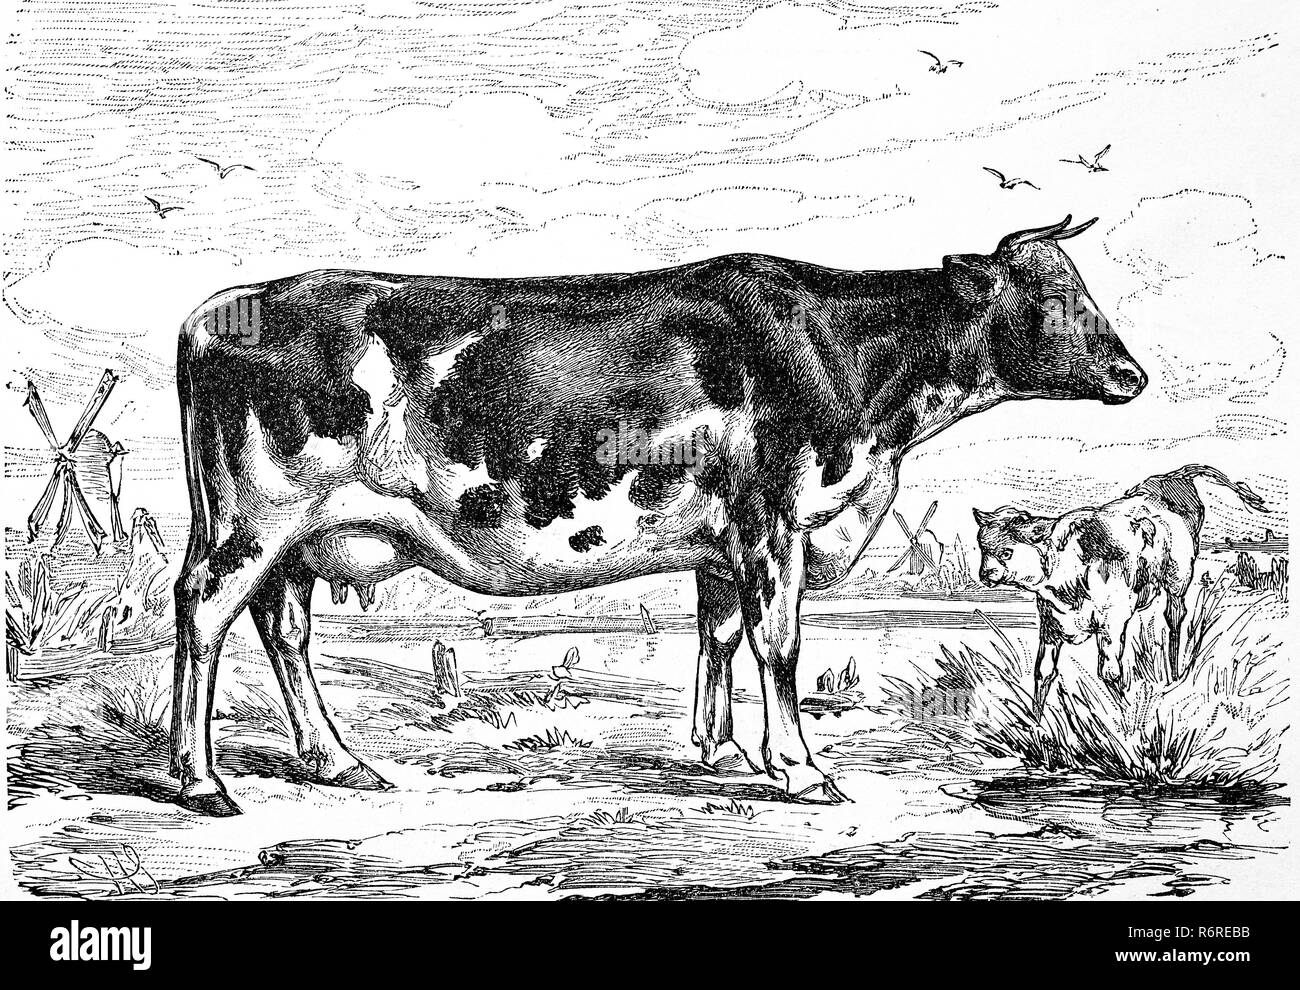 Digital improved reproduction, cattle breed, a cow from the Netherlands, Black Pied Dairy cattle, Kuh der hollÃ¤ndischen Rasse, Schwarzbunte Milchkuh, original print from the 19th century Stock Photo